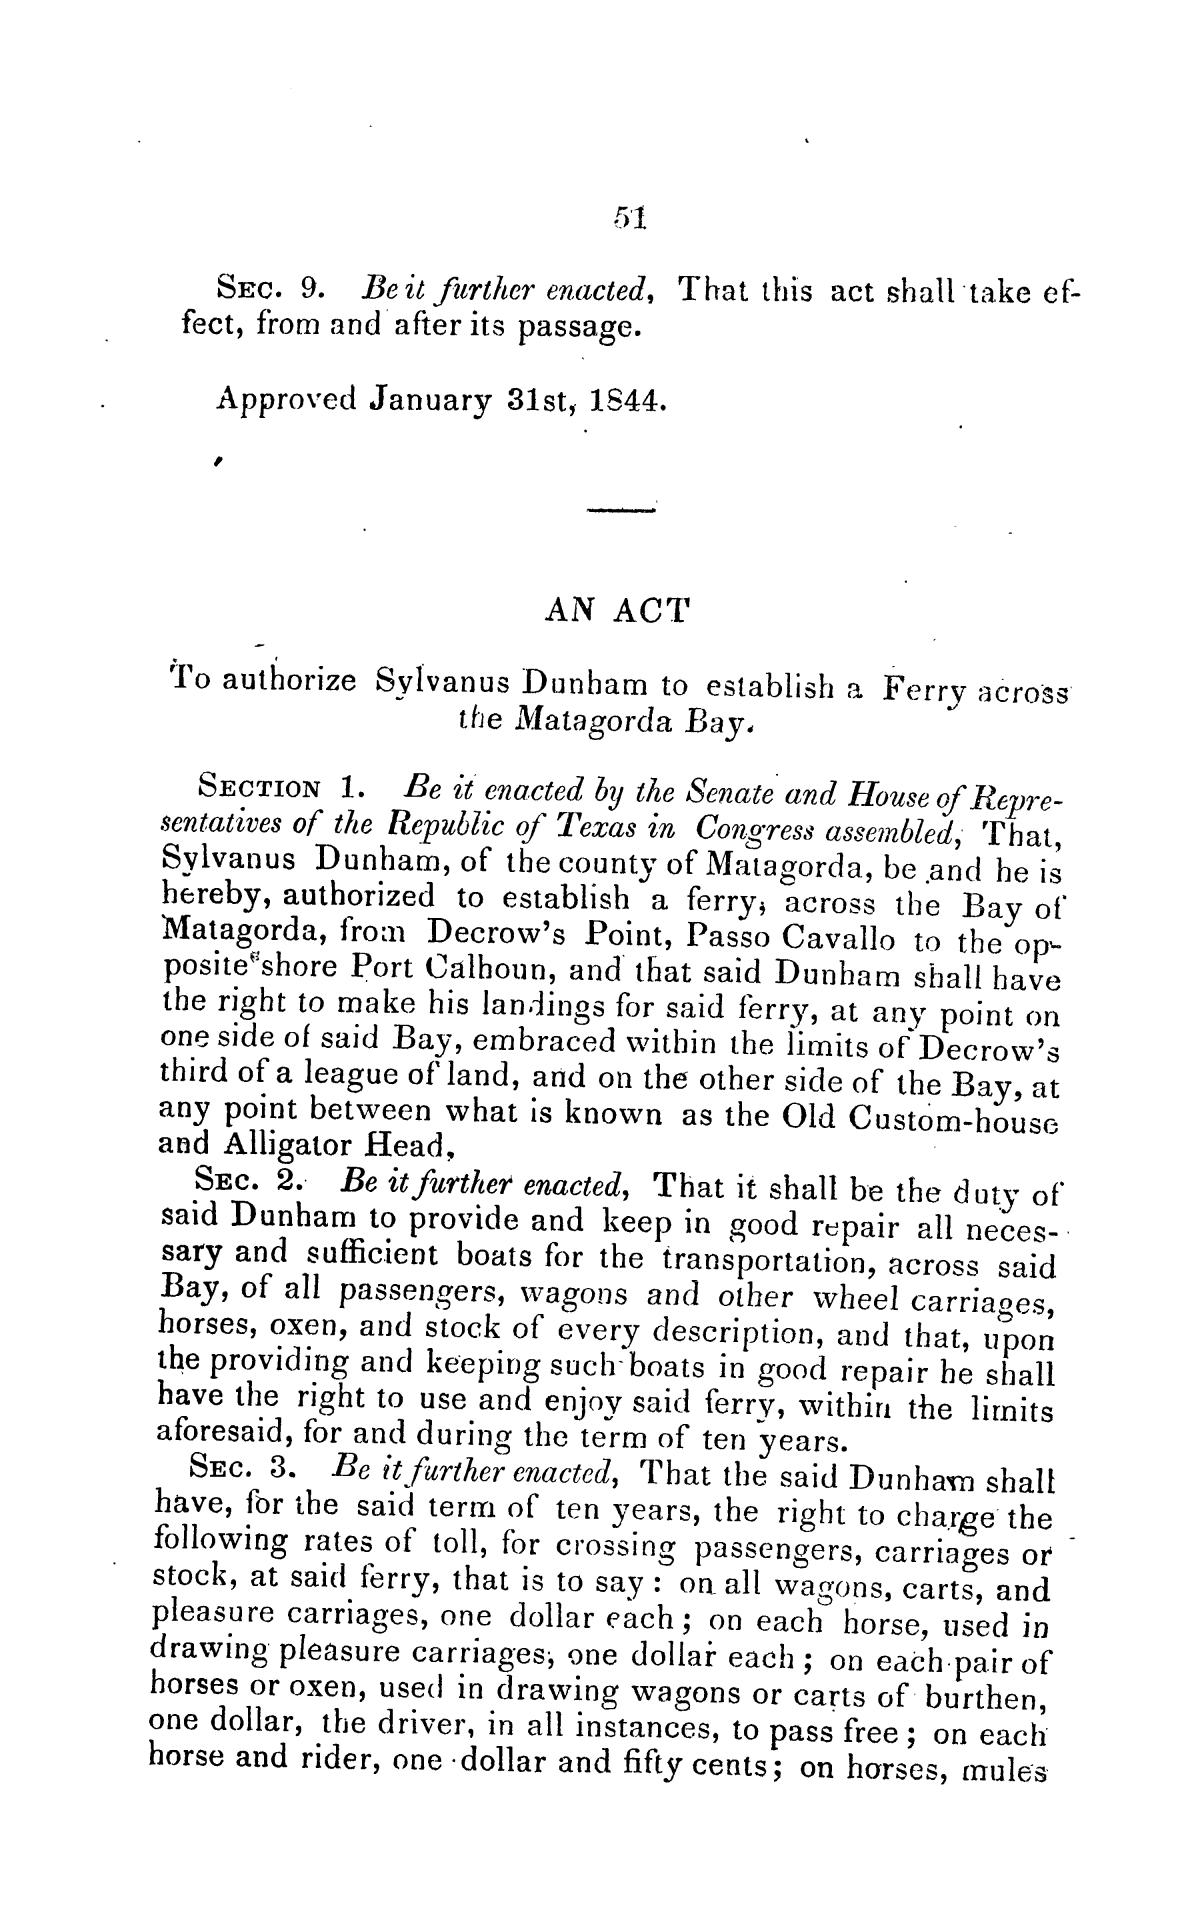 Laws Passed by the Eighth Congress of the Republic of Texas.
                                                
                                                    51
                                                